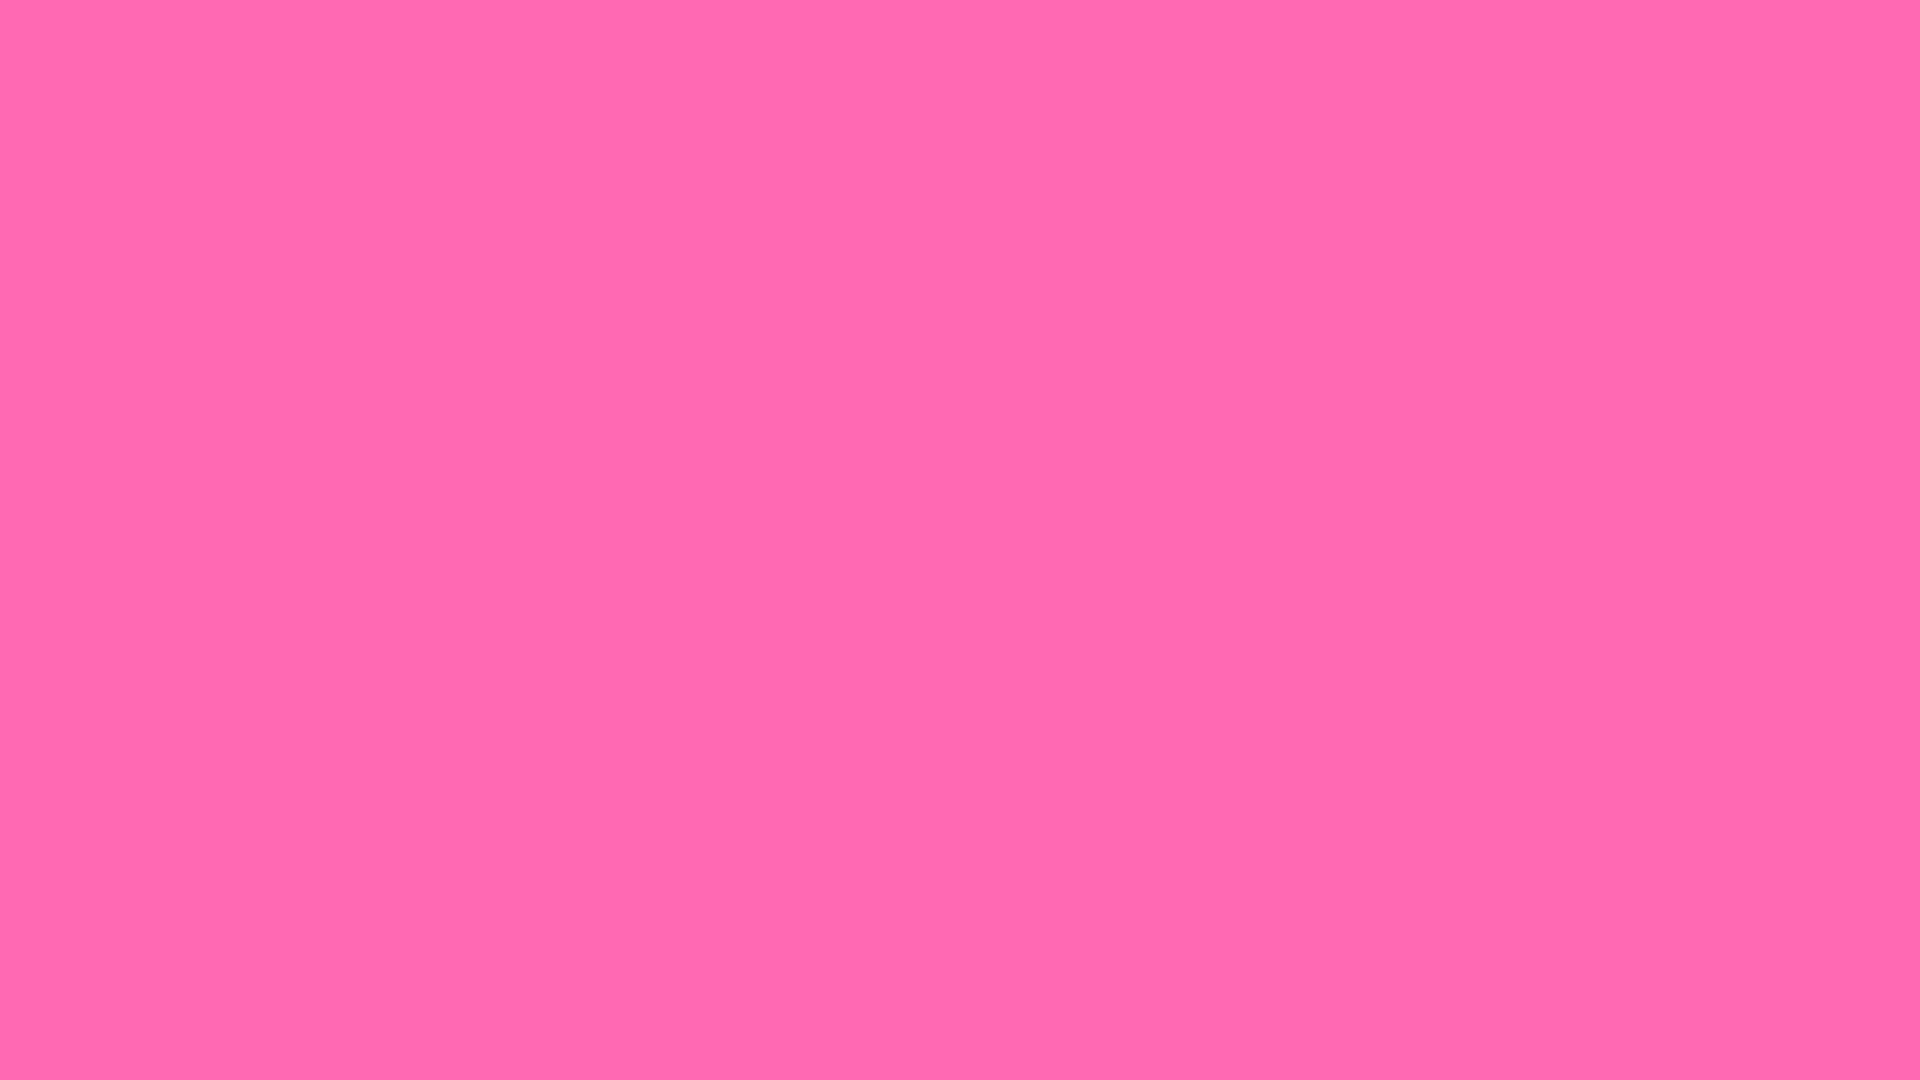 Pink solid color background view and download the below background 1920x1080